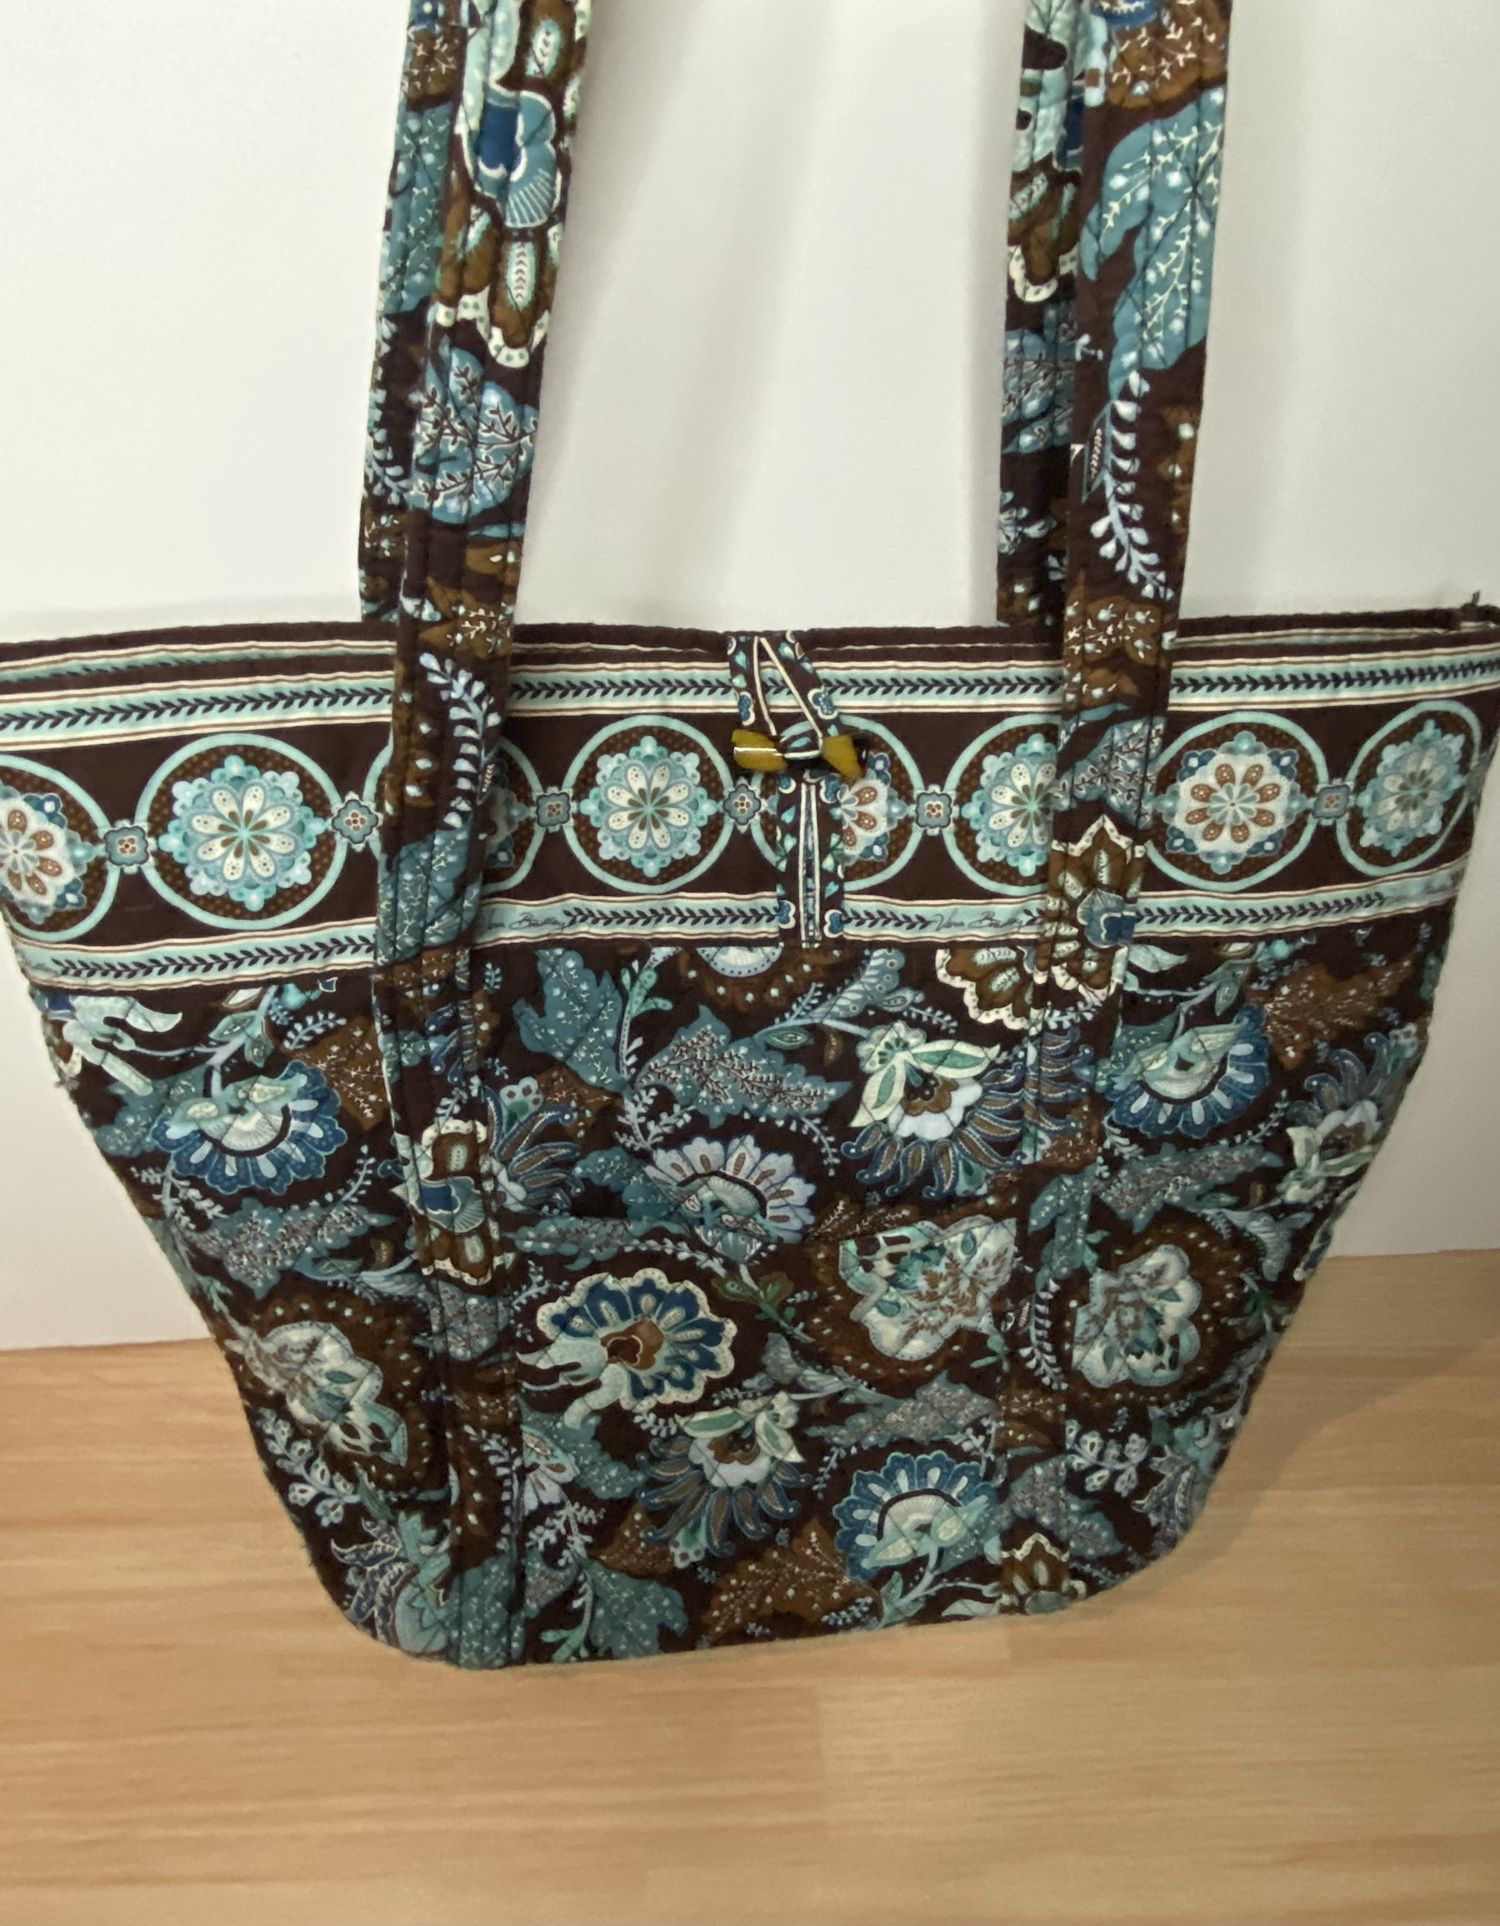 Vera Bradley Java Blue/Brown Villager Tote Bag Quilted Retired Large 18”x14”x6”